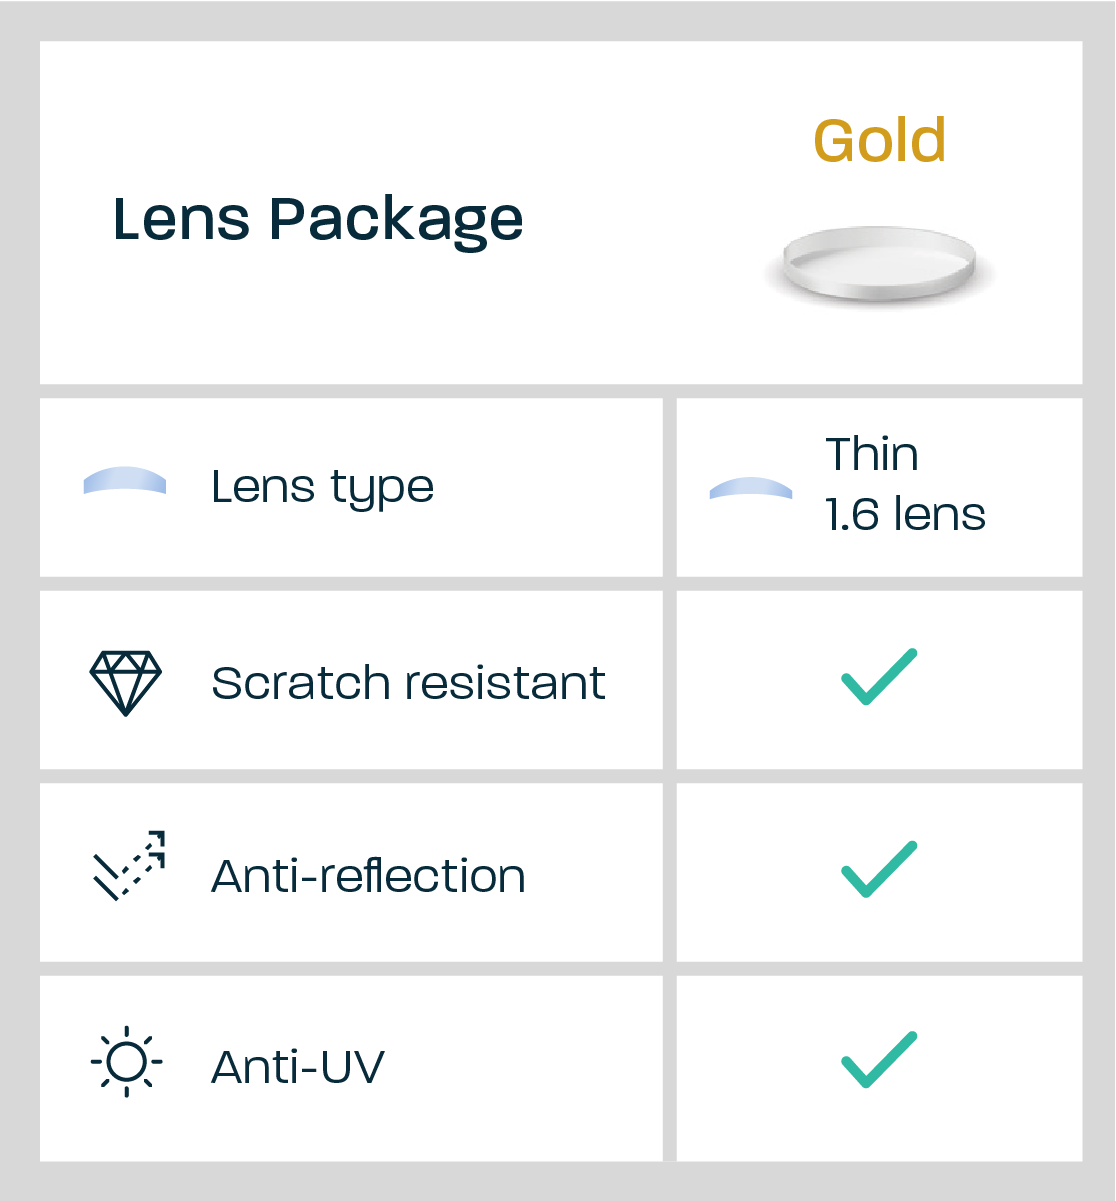 Gold Package features: thin lenses, scratch-resistant, anti-reflection and anti-UV coatings